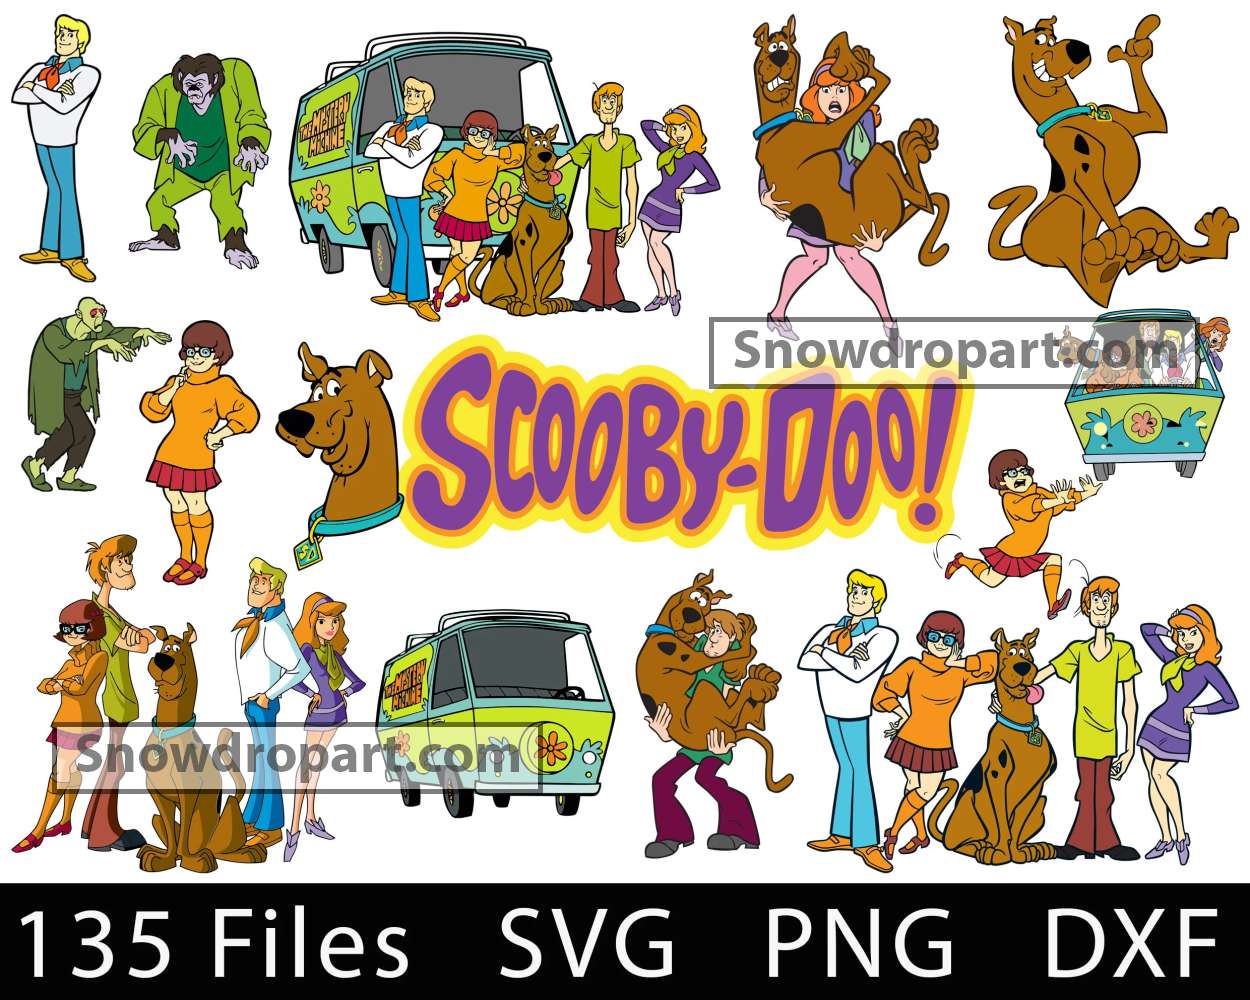 Scooby Doo Characters Archives - Snowdrop Art - High quality and Free ...